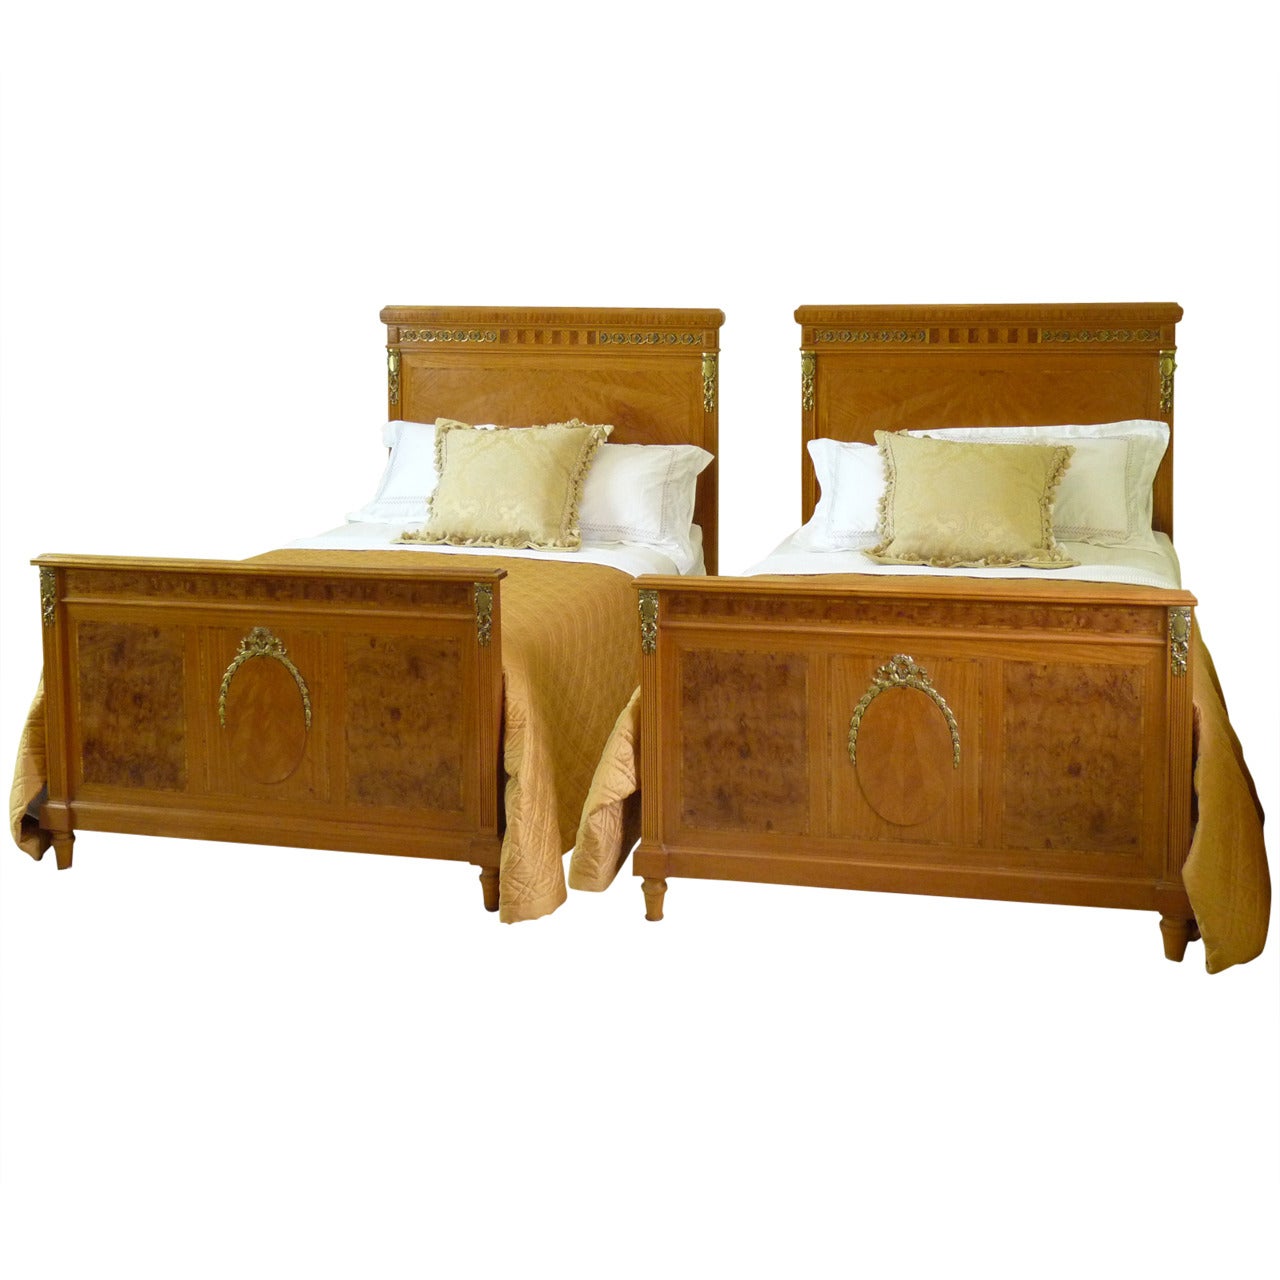 Matching Pair of Twin Empire Style Beds